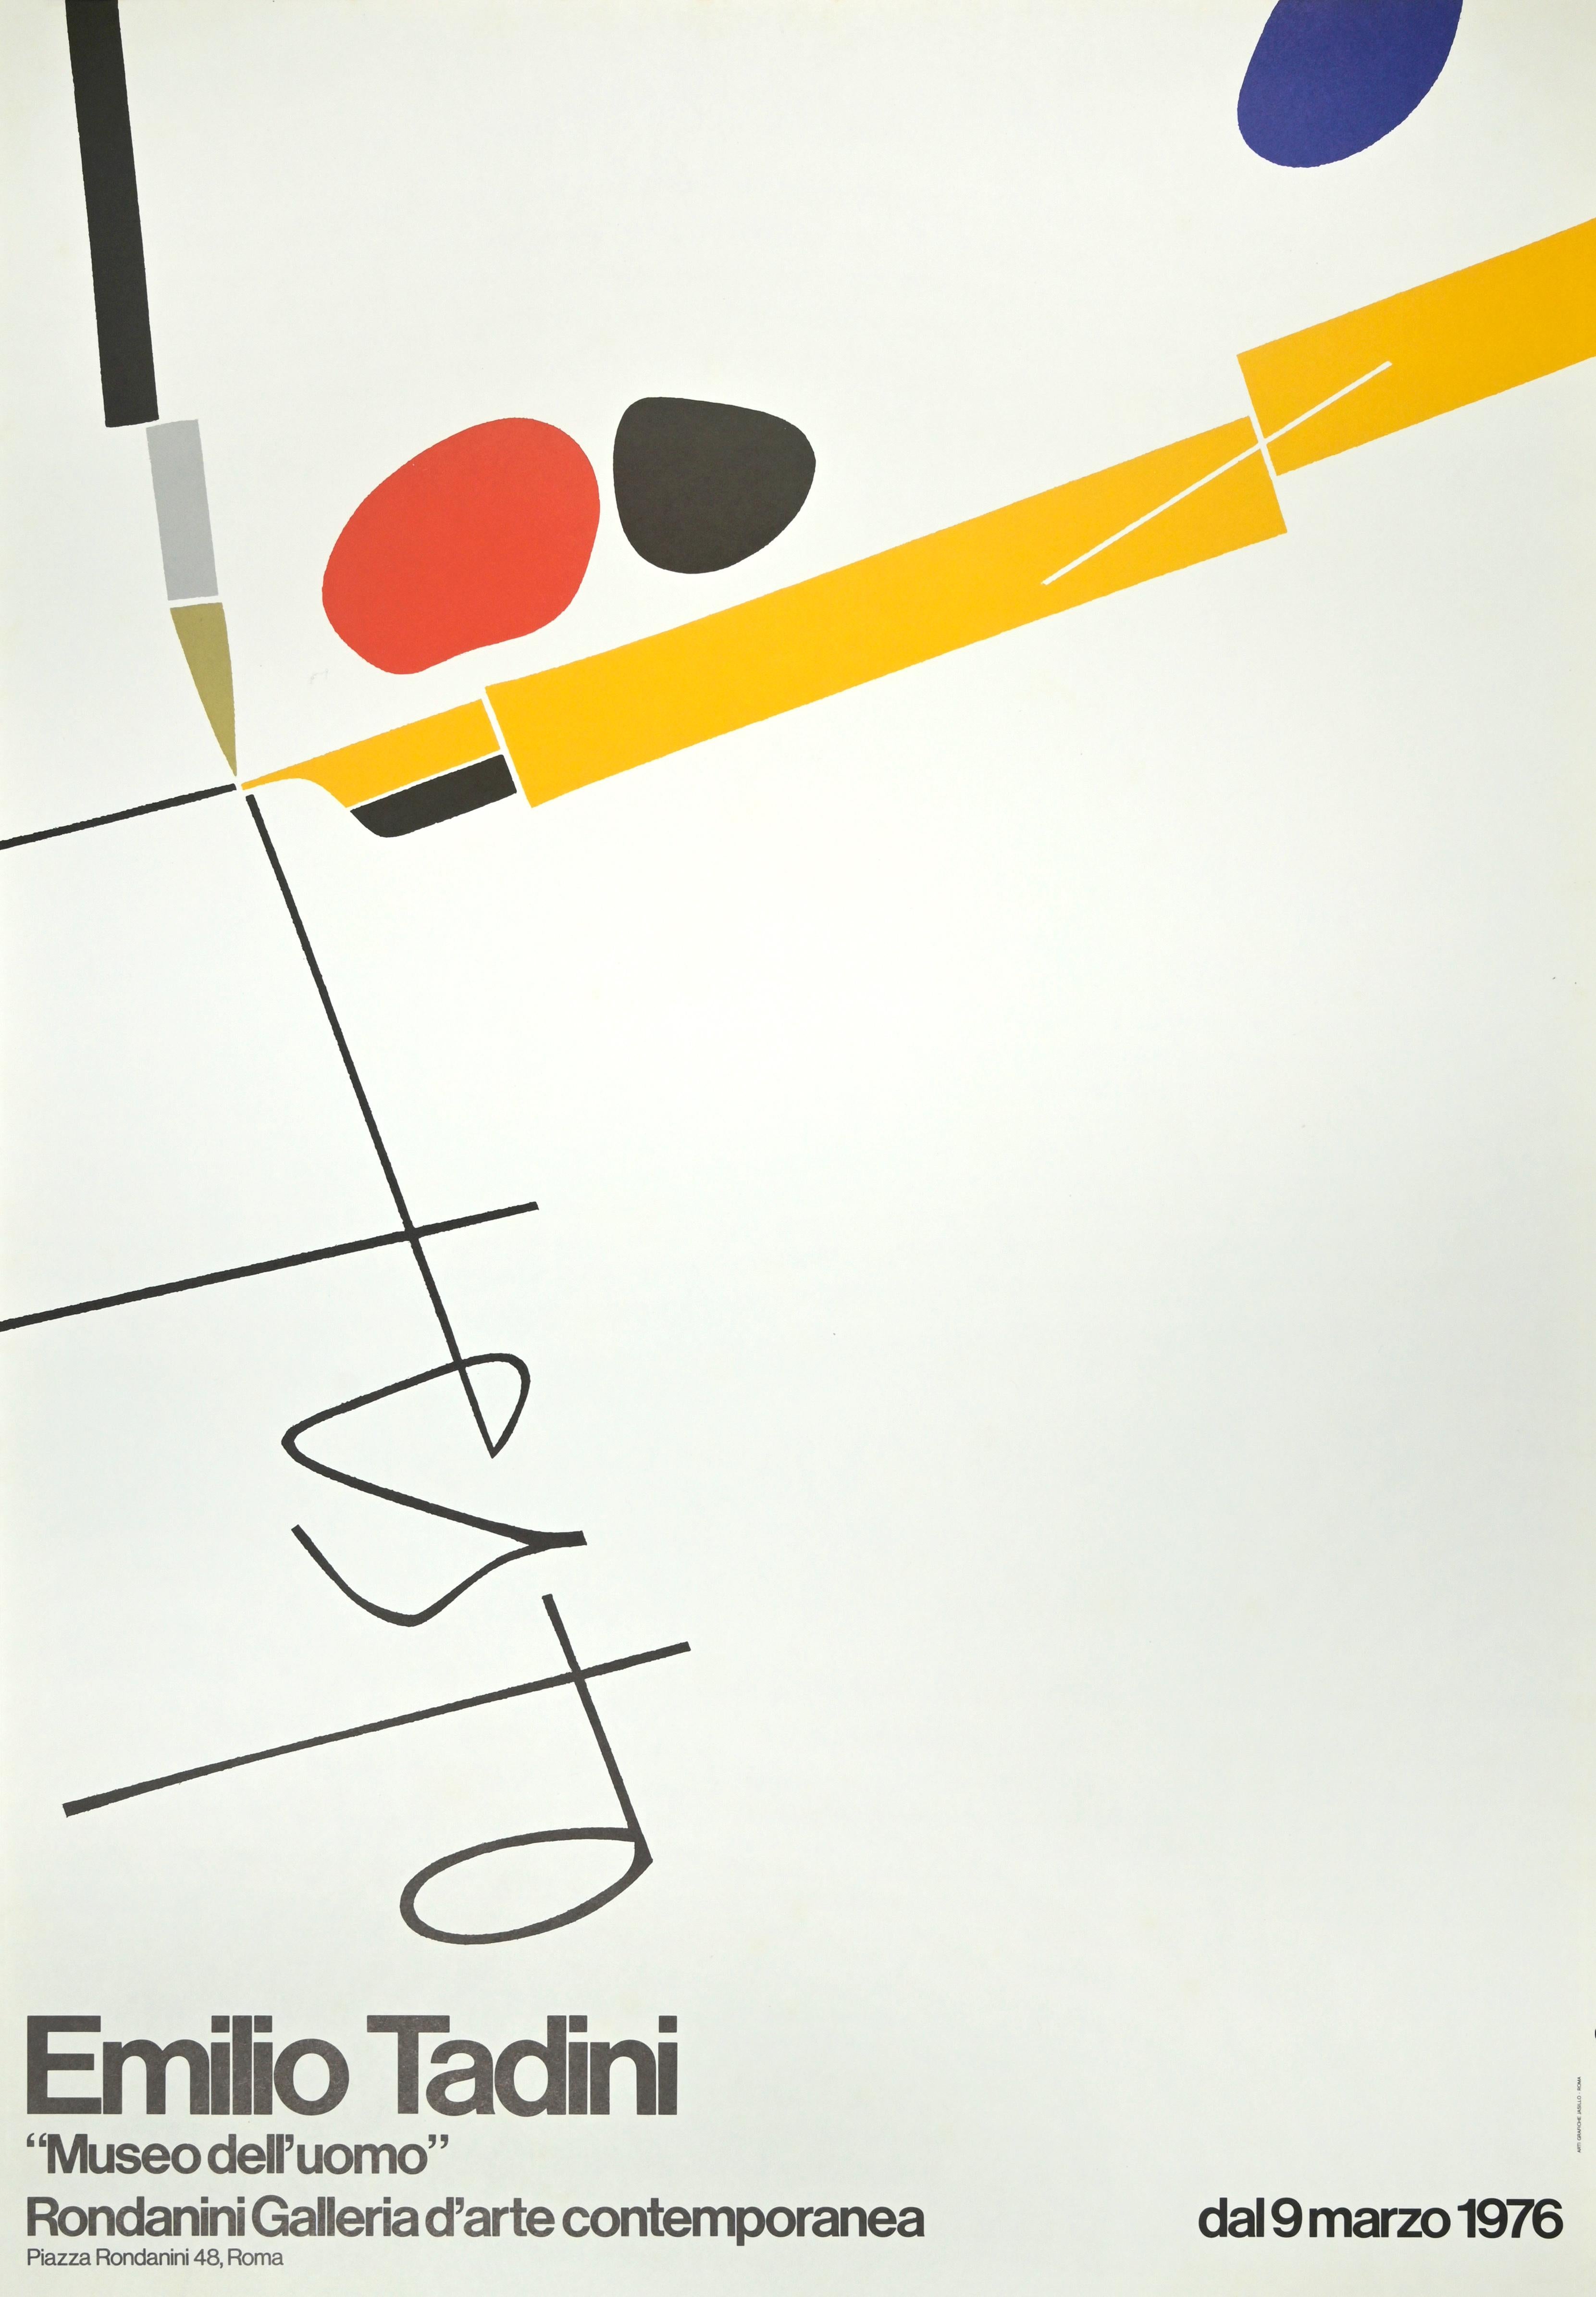 Emilio Tadini Poster Exhibition is a vintage offset poster realized in 1976.
The artwork was realized in the occasion of the exhibition "Museo dell'uomo" held in Rondanini Gallery at Rome in 1976.
The artwork is hand signed in pencil by the